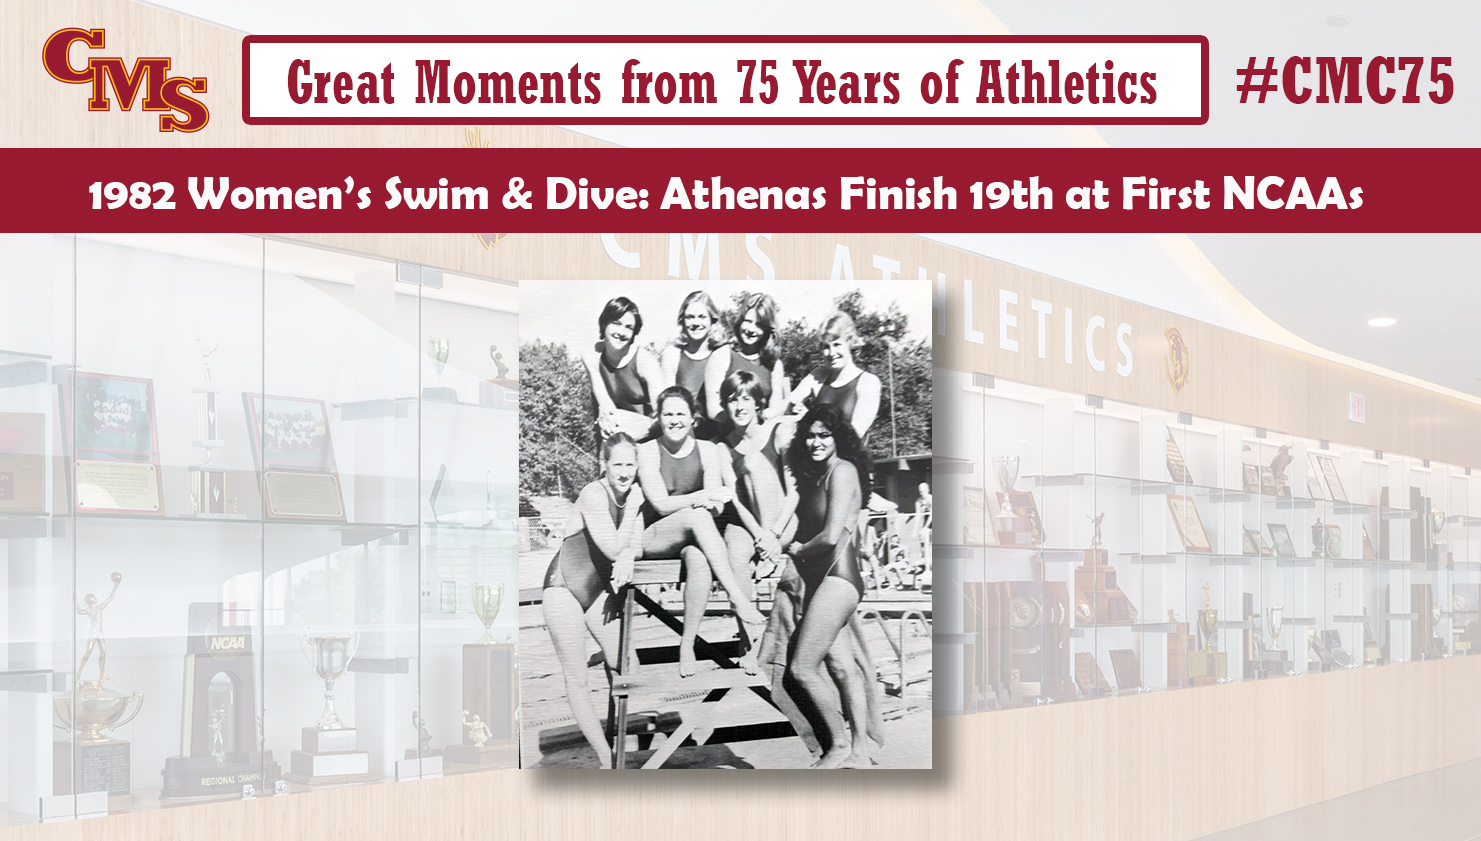 The 1982 CMS women's swimming and diving team. Words over the photo read: Great Moments from 75 Years of Athletics. 1982 Women's Swim and Dive: Athenas Finish 19th at First NCAAs